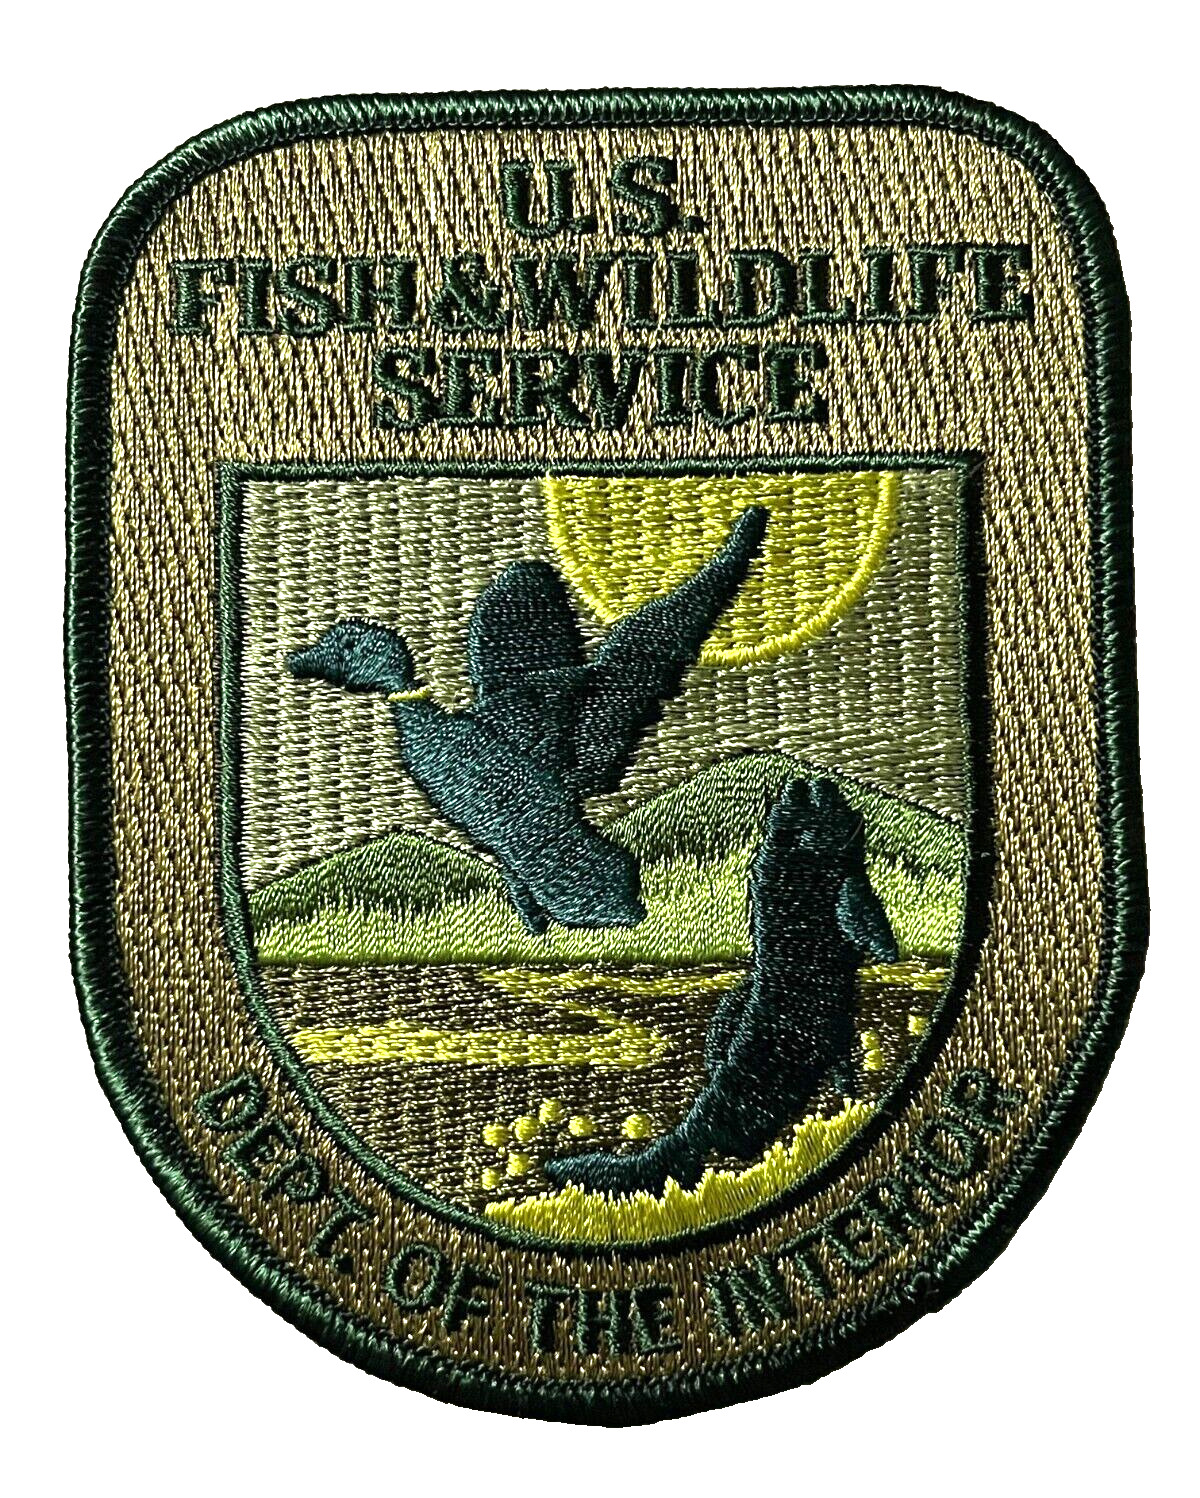 US FISH & WILDLIFE SERVICE DEPT OF THE INTERIOR PATCH (SPC 8) GREEN SUBDUED